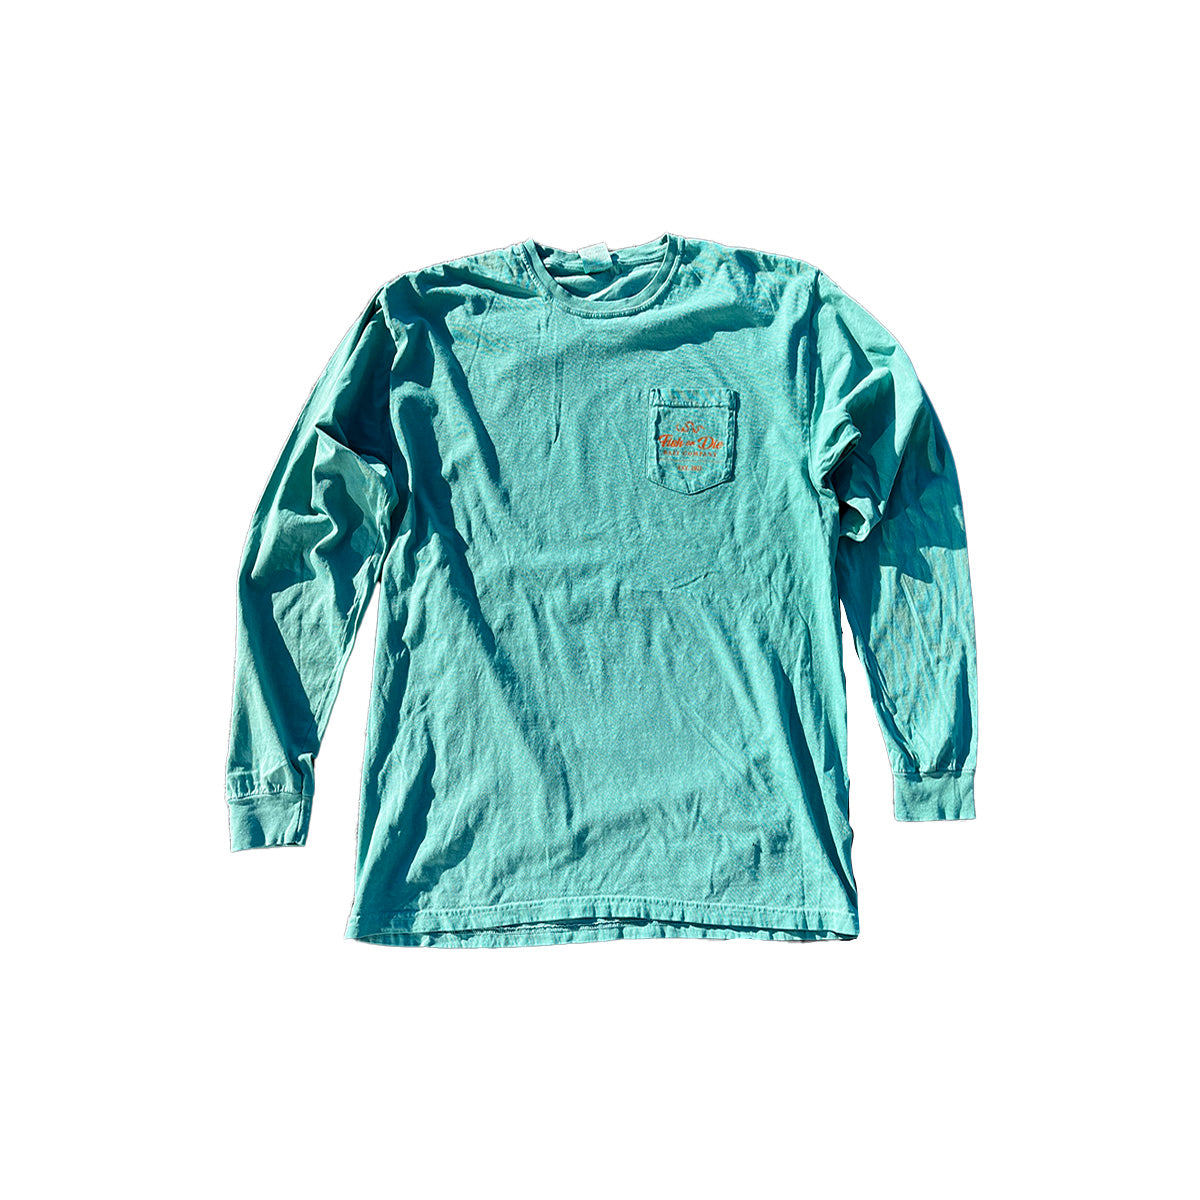 Tackle Box x Fish, or Die Bait Co Battle of the Bay L/S Tee - Seafoam